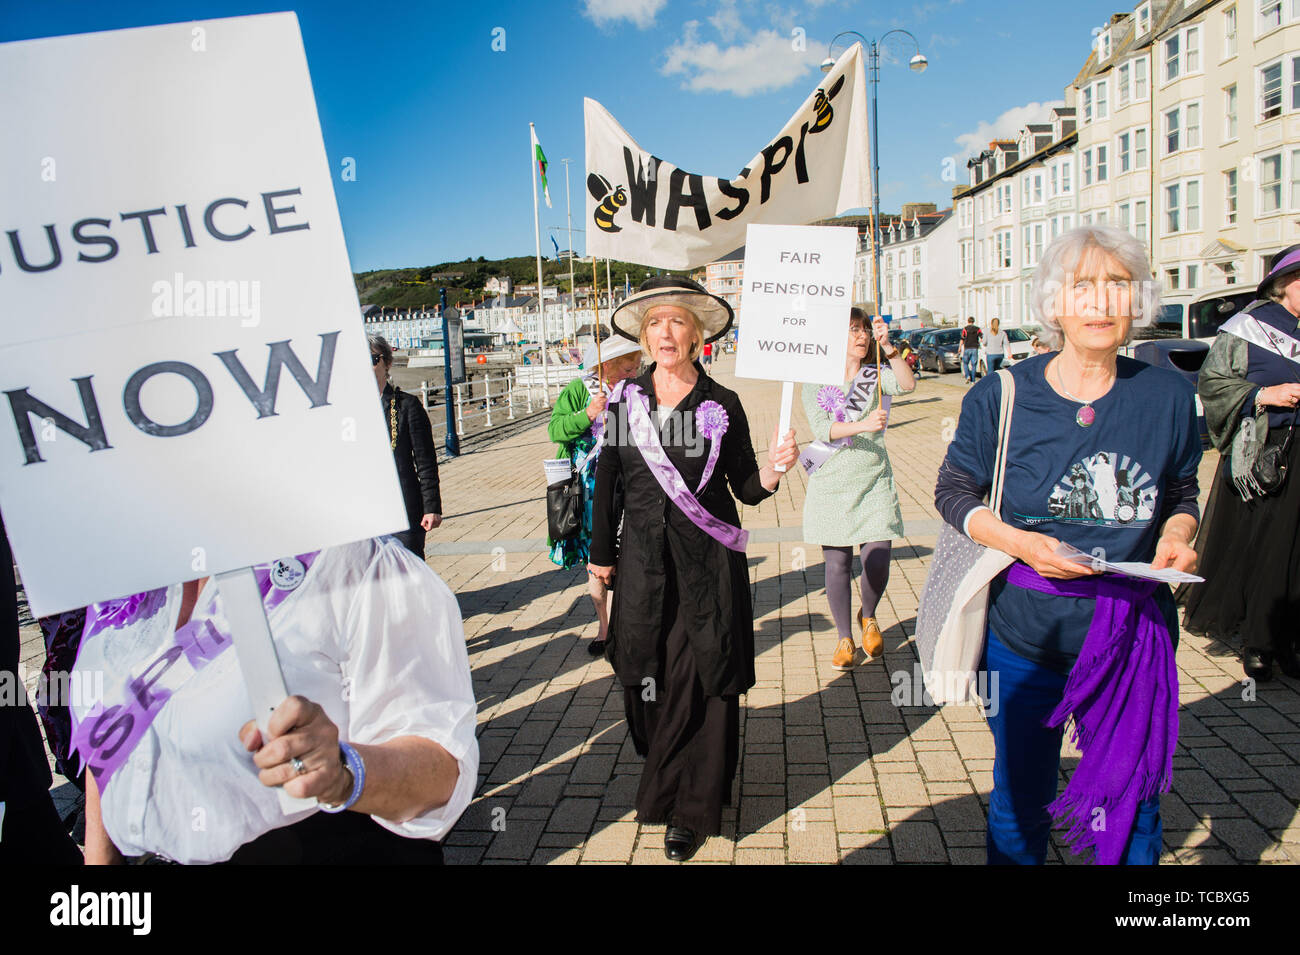 Aberystwyth Wales UK, Thursday 06 June 2019  A group of placard-carrying grannies in their 60s, dressed as suffragettes  marching along the promenade in Aberystwyth as part of a nation-wide protest against the raising of the state pension age for women . WASPI [Women Against State Pension Injustice] are campaigning to reverse the decision to change  the pension age to 67  for women born in the 1950’s . There are 5,000 women in Ceredigion born in the 1950s who have lost years of their pensions as a result of the Government’s acceleration policy. The legality of these changes is now being tested Stock Photo